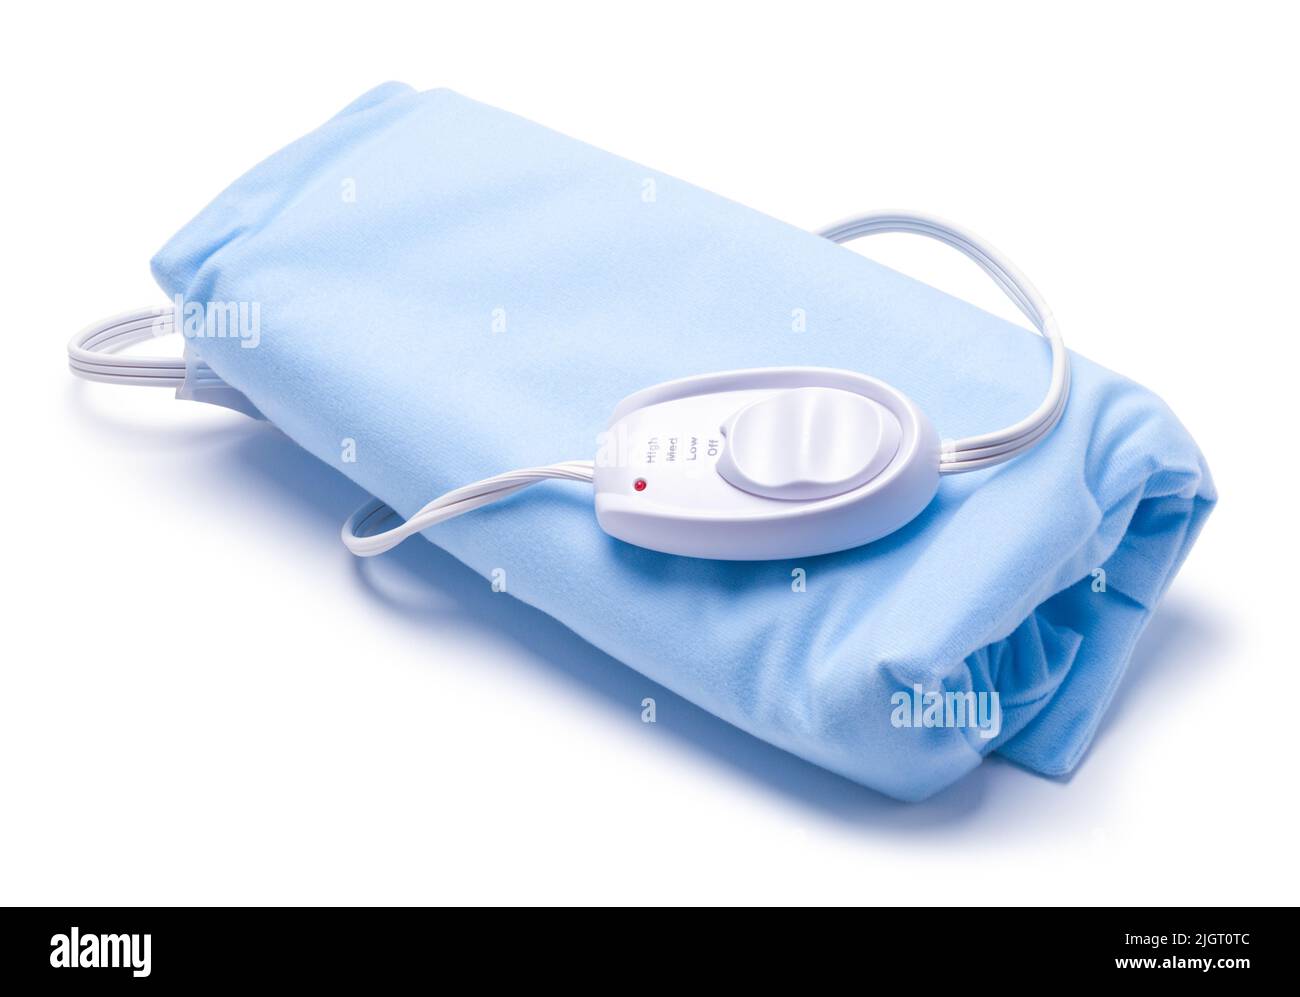 Blue Heating Pad Cut Out on White. Stock Photo